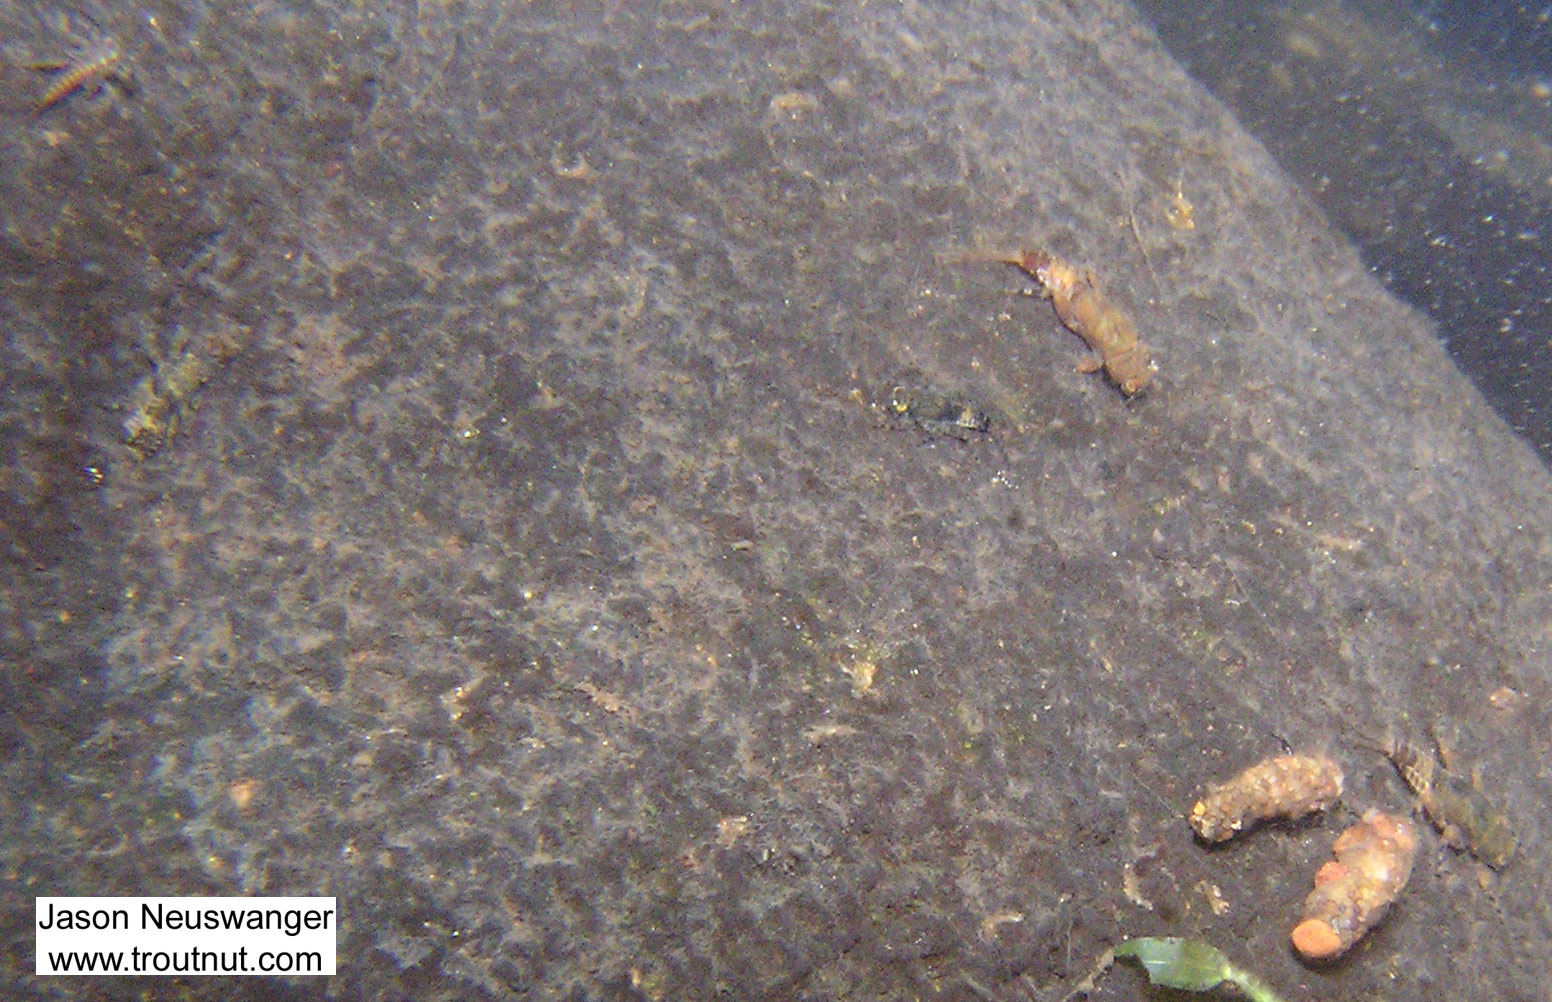 In this picture: Insect Order Trichoptera (Caddisflies) and Mayfly Species Ephemerella subvaria (Hendrickson). From the Namekagon River in Wisconsin.